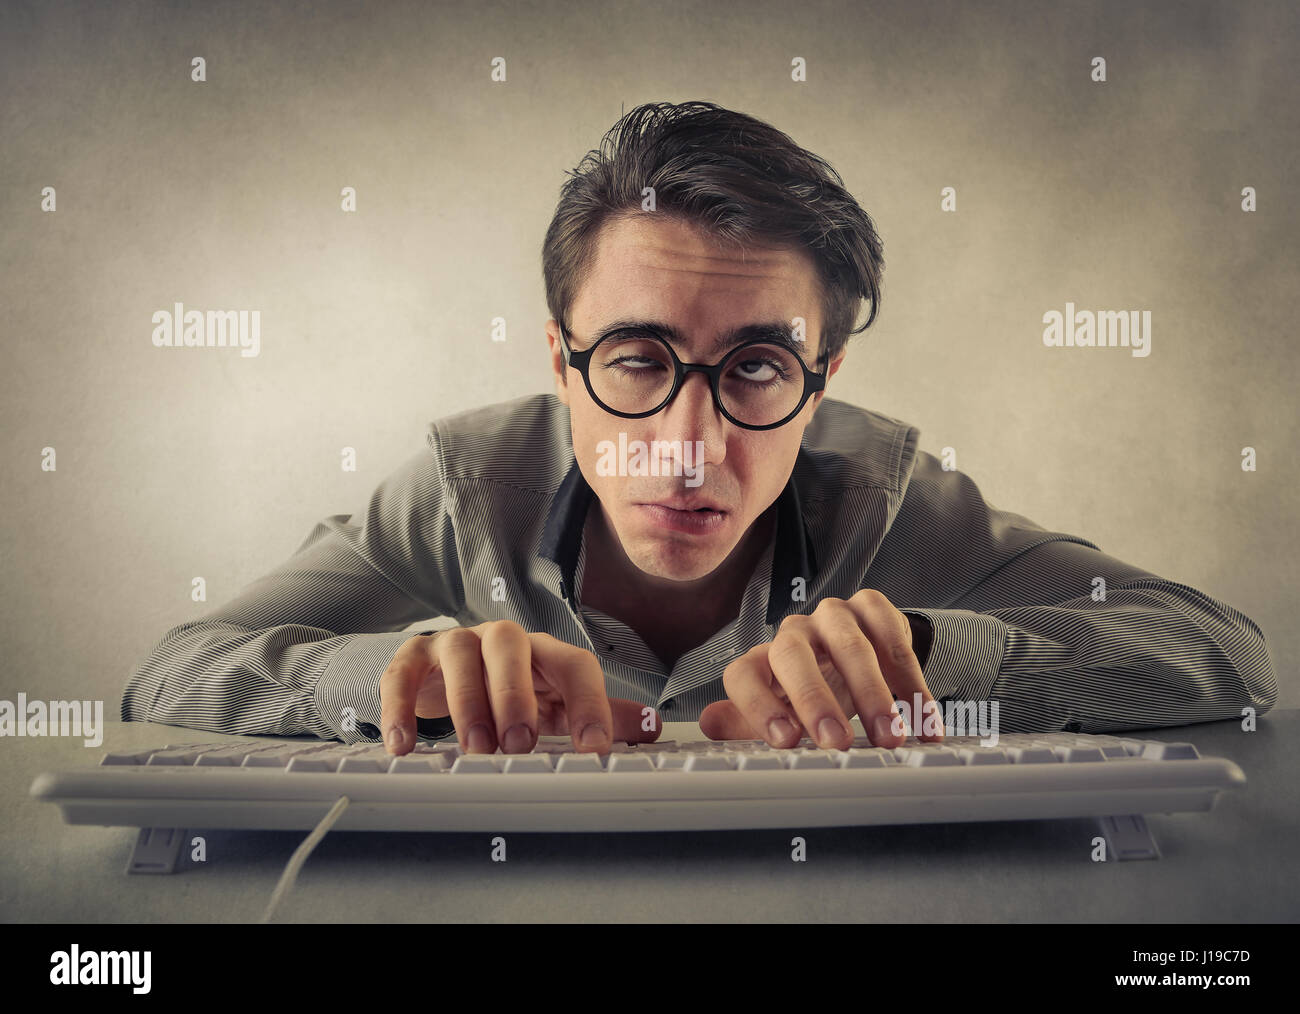 Tired man in front of computer Stock Photo